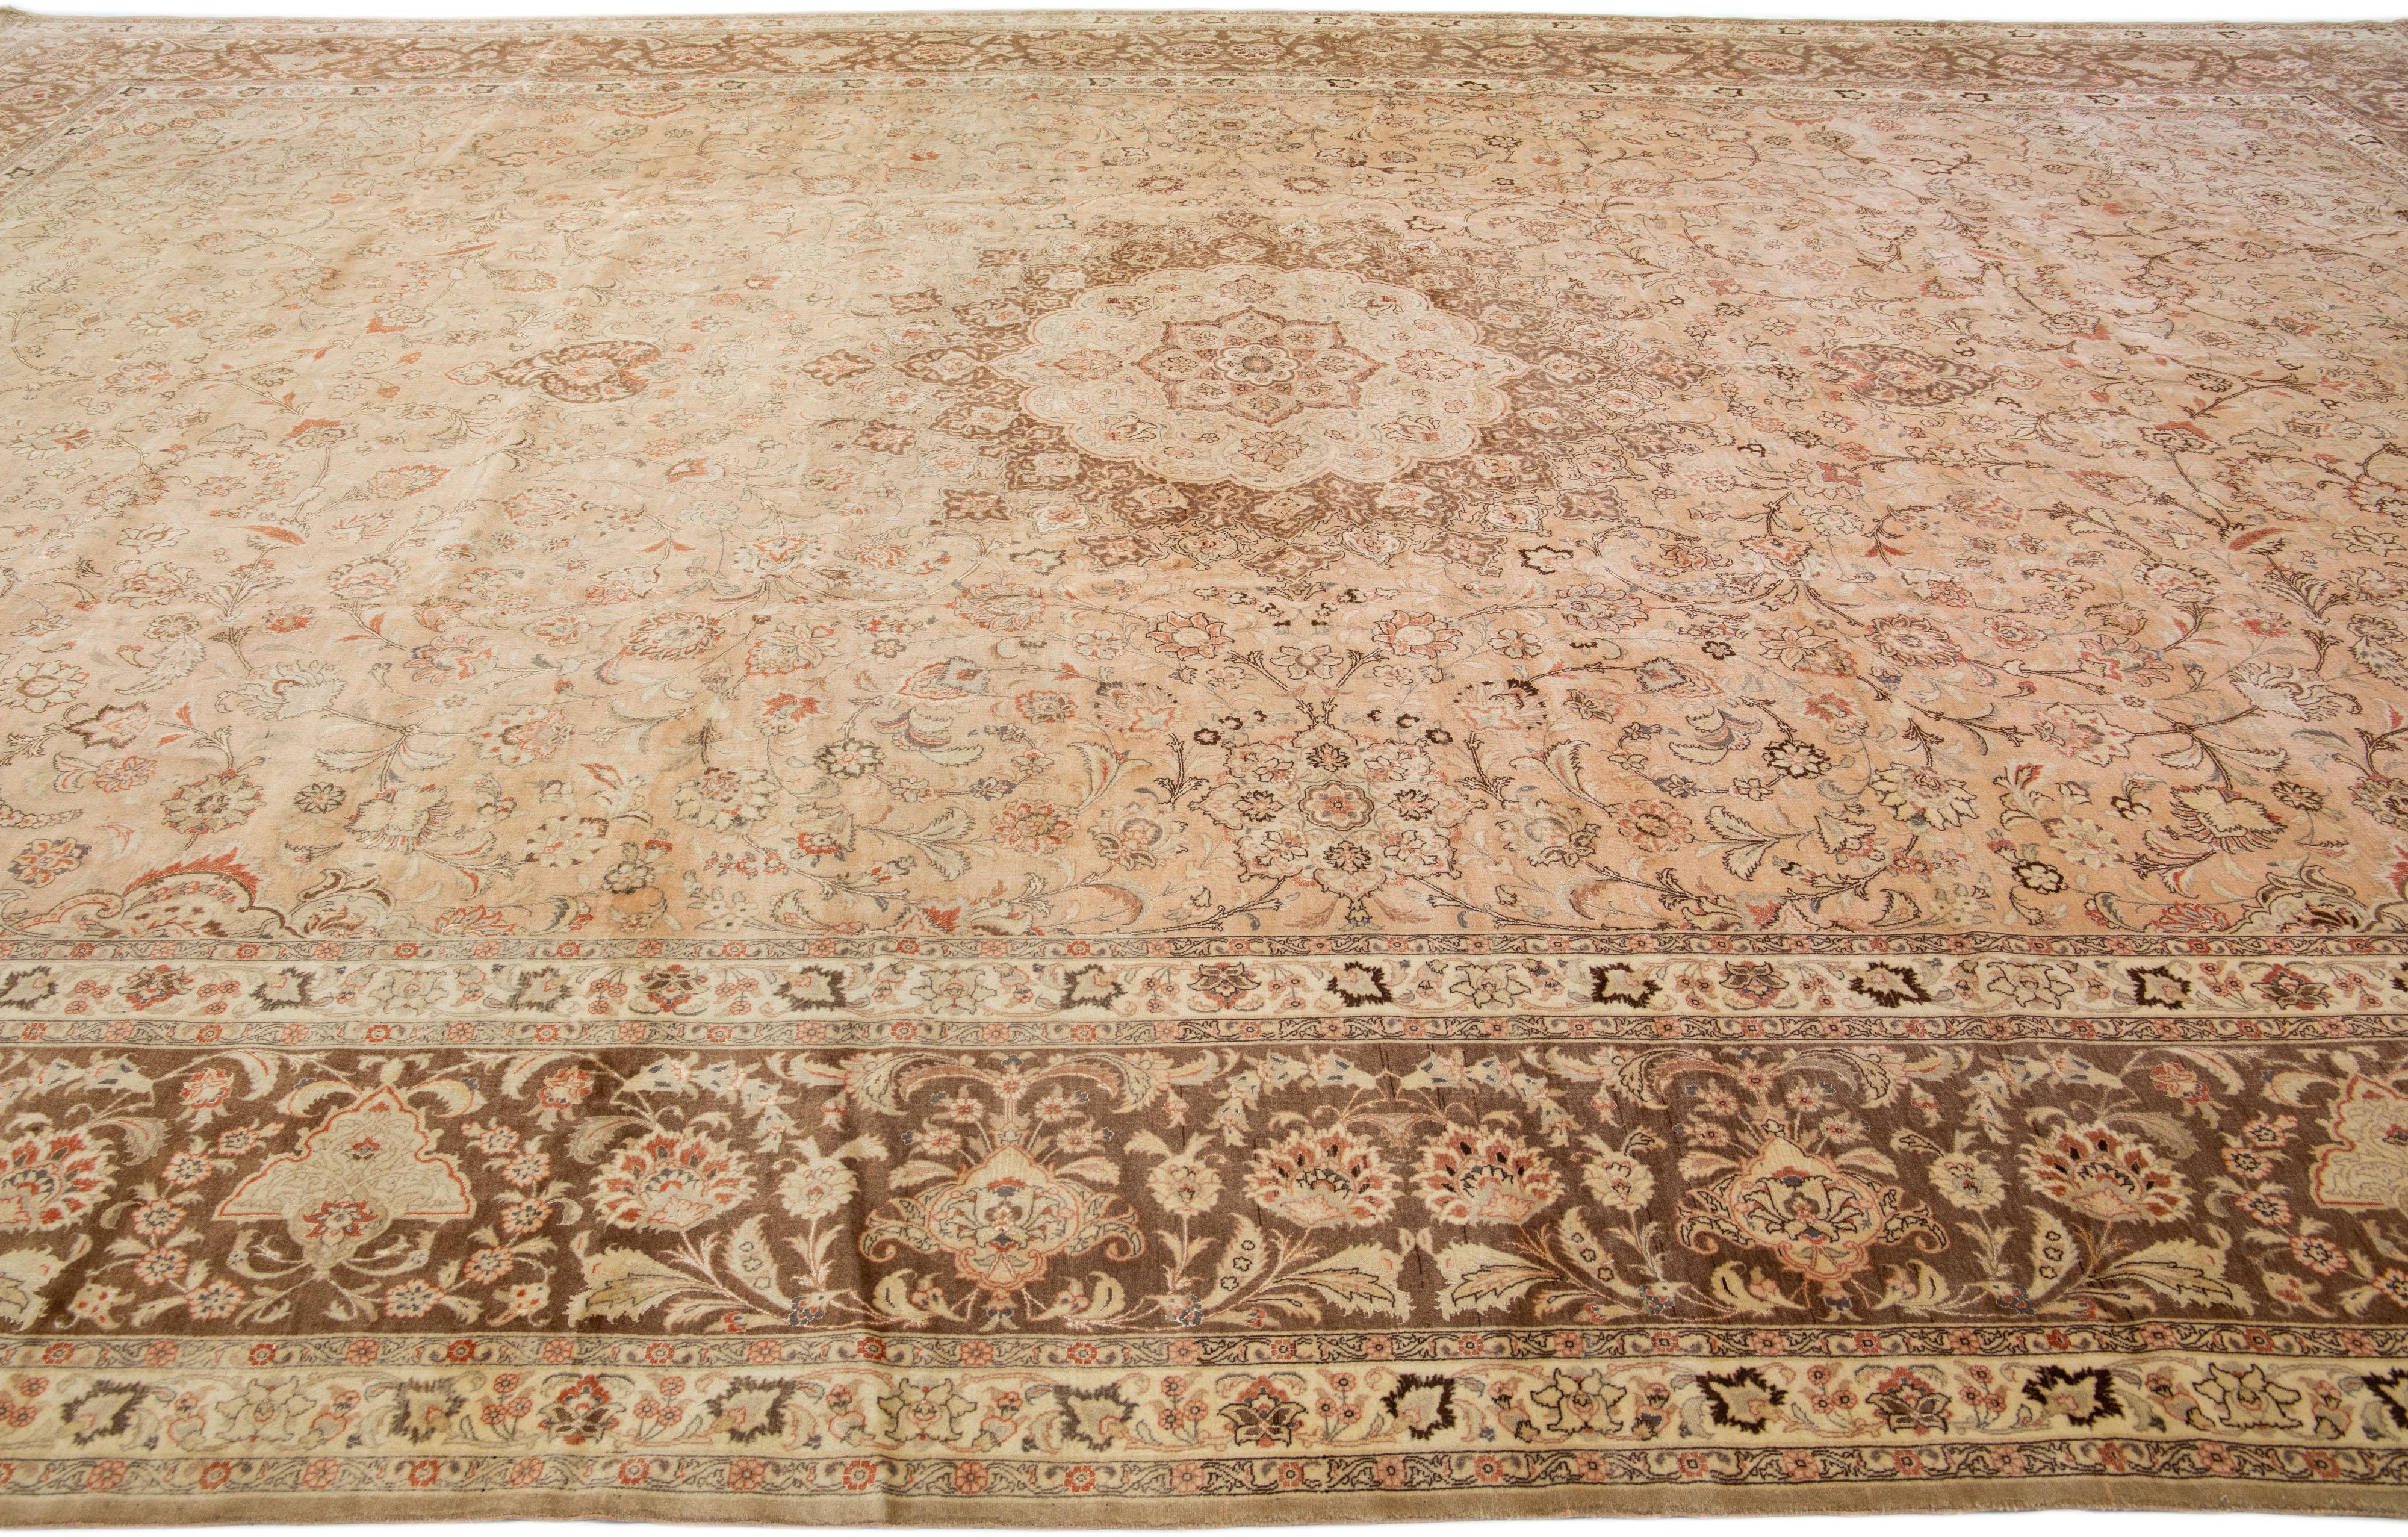 Peach Antique Tabriz Handmade Oversize Persian Wool Rug with Rosette Design In Excellent Condition For Sale In Norwalk, CT